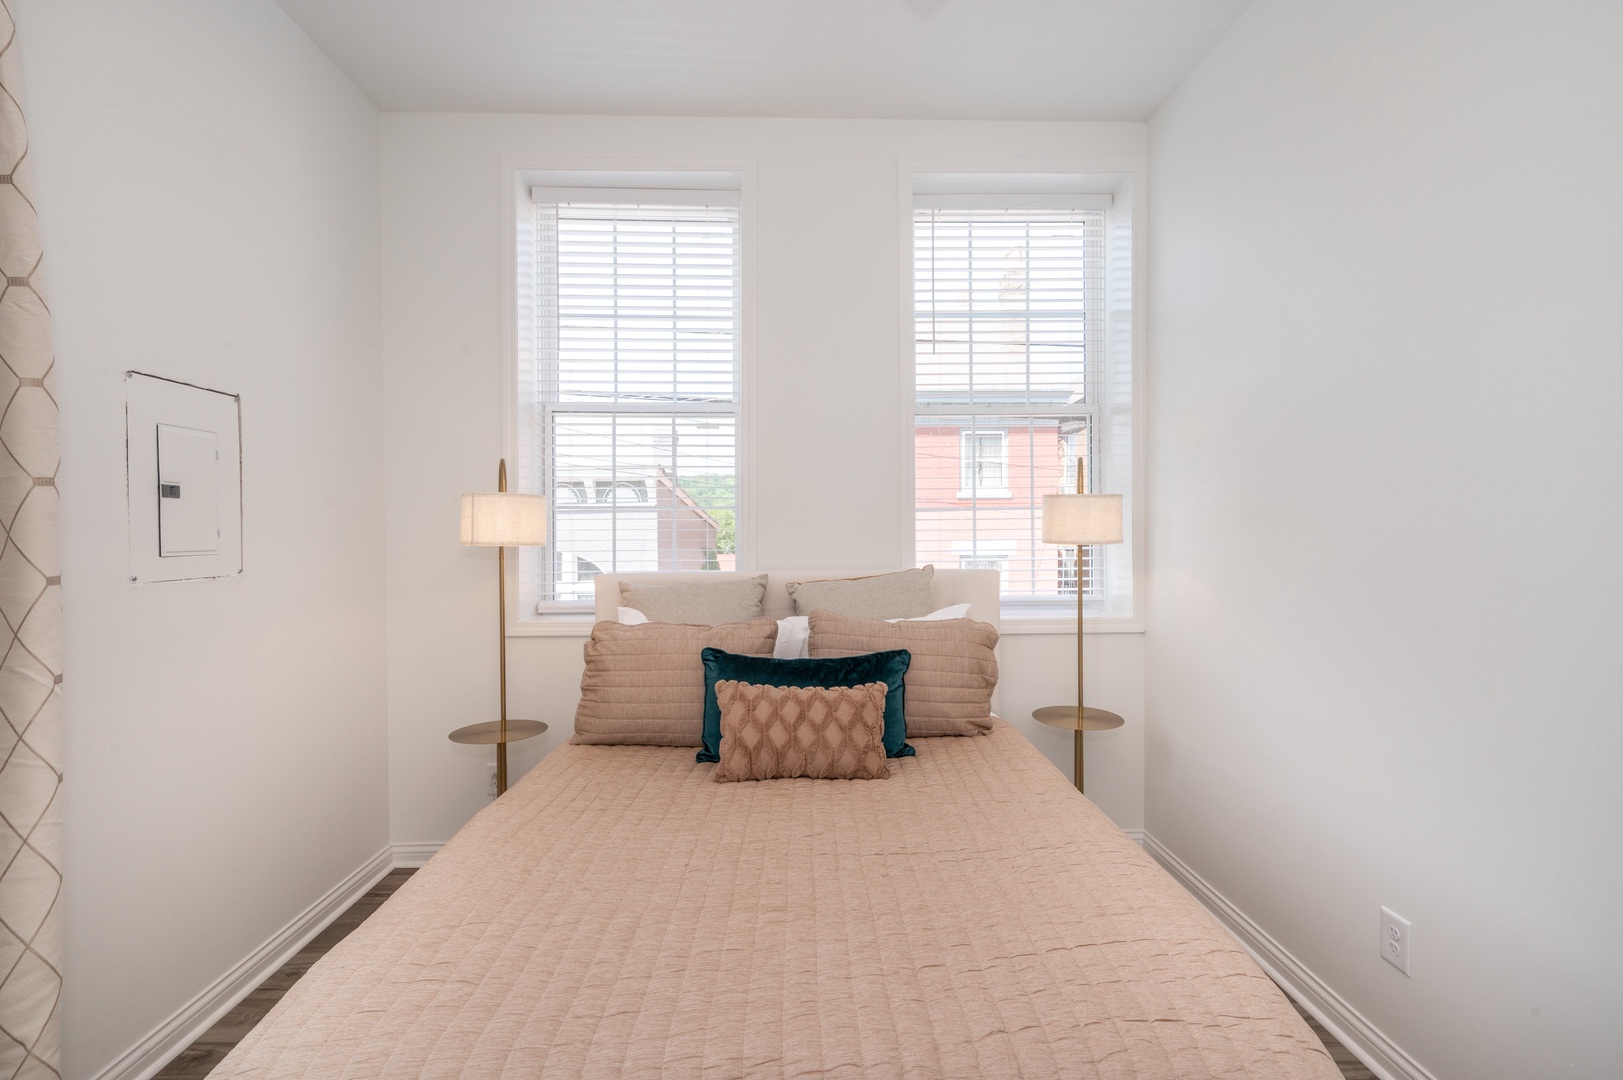 After a day exploring the area, retreat to your very own queen bedroom